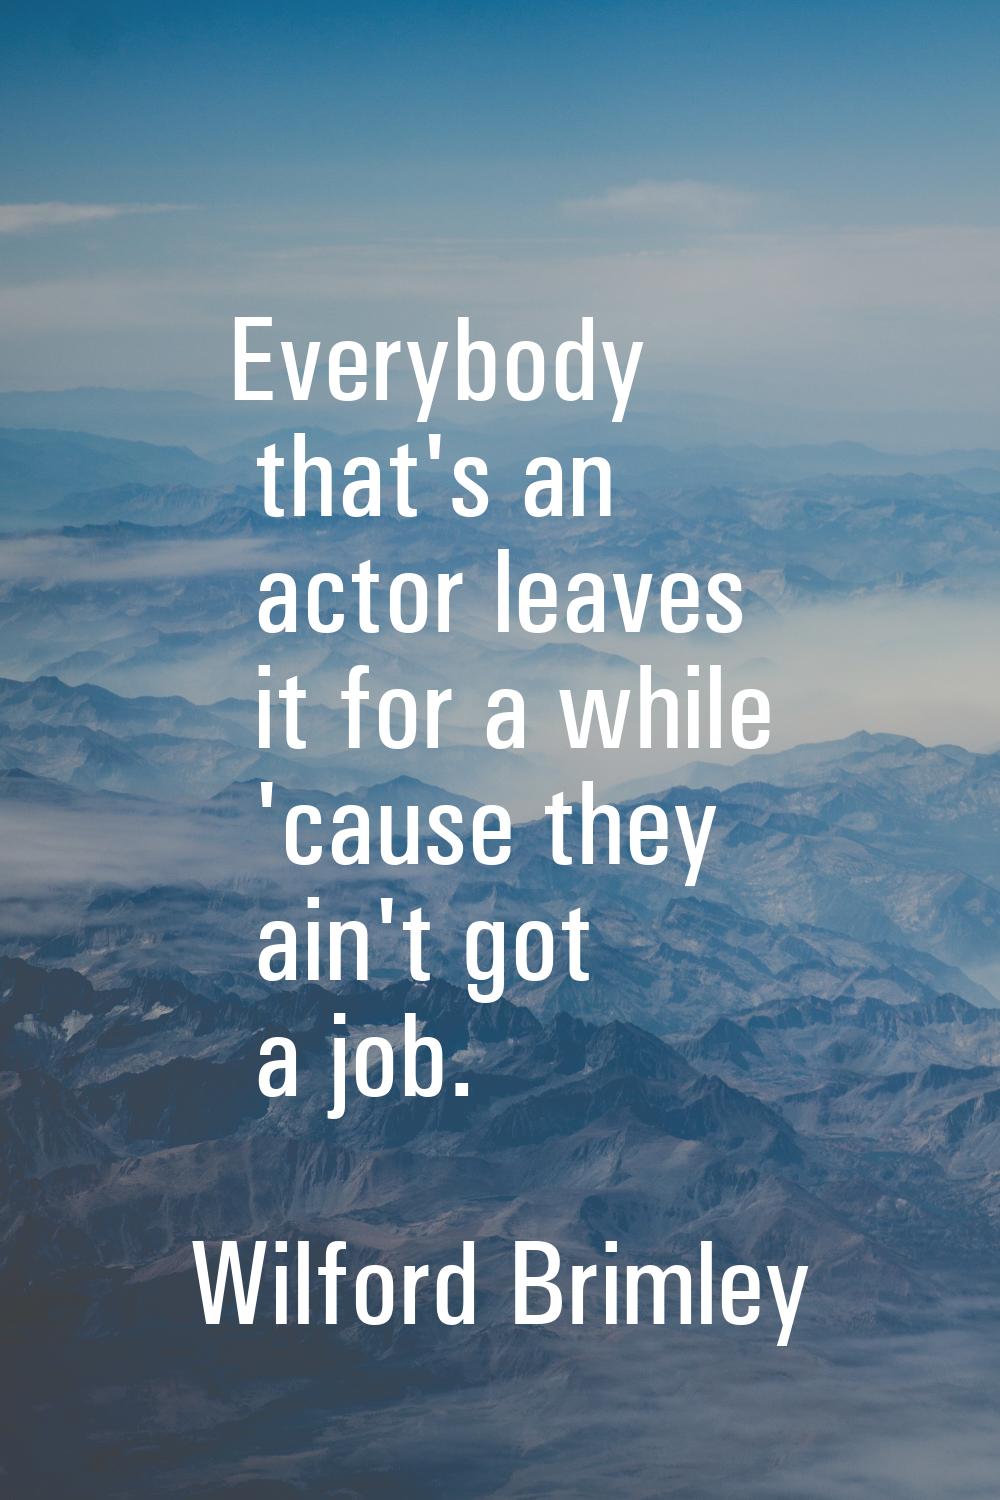 Everybody that's an actor leaves it for a while 'cause they ain't got a job.